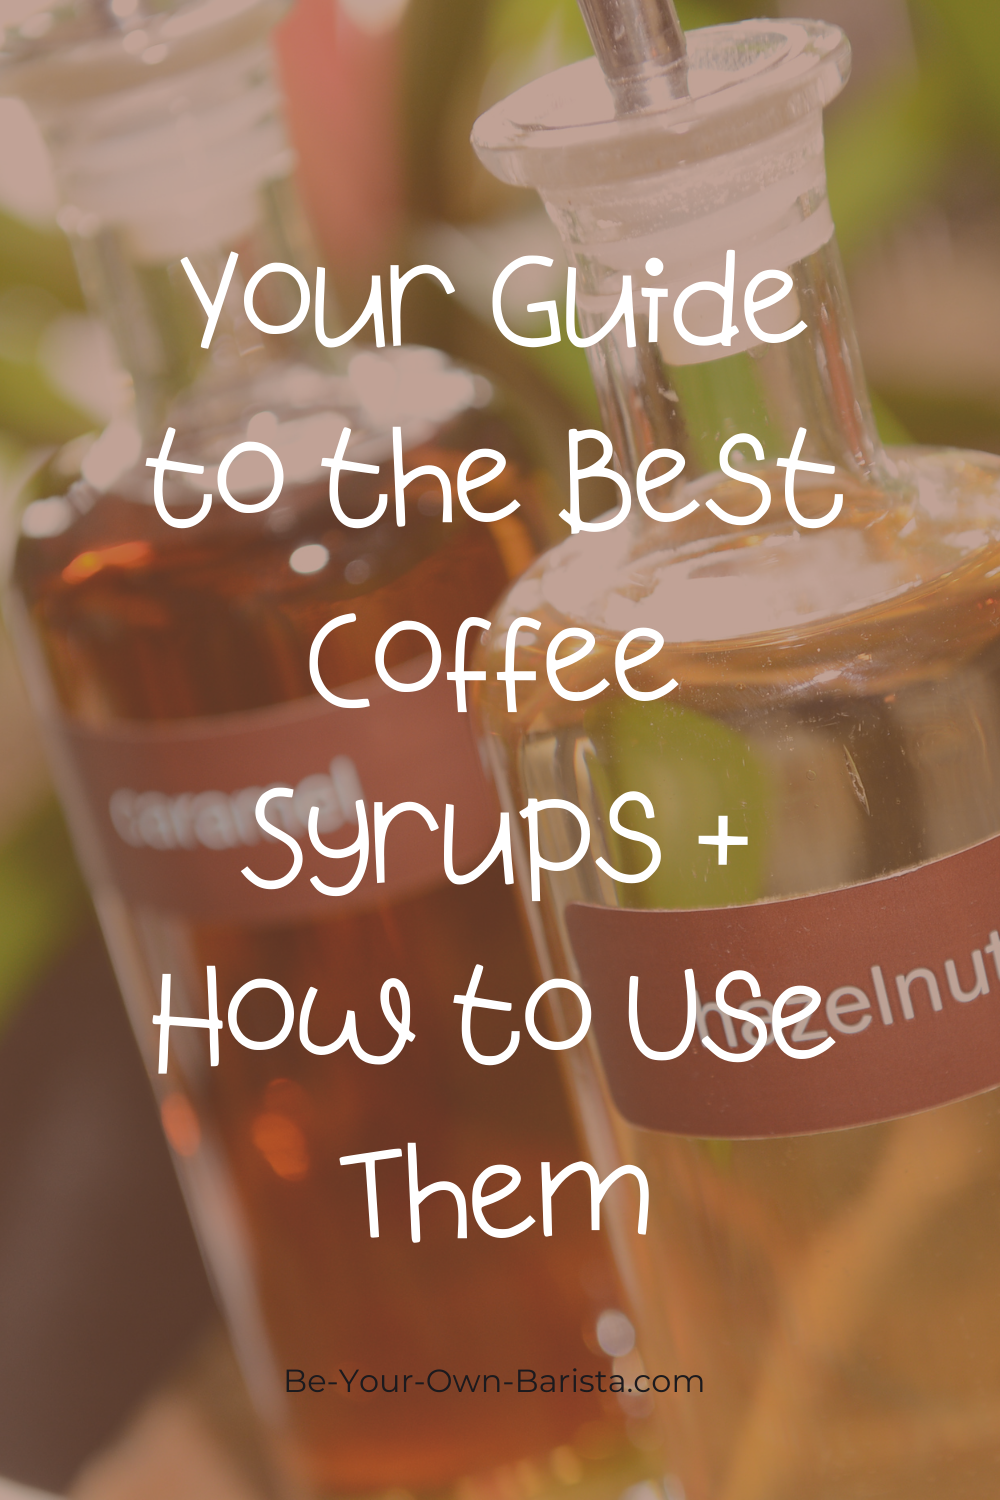 Your Guide to the Best Coffee Syrups + How to Use Them